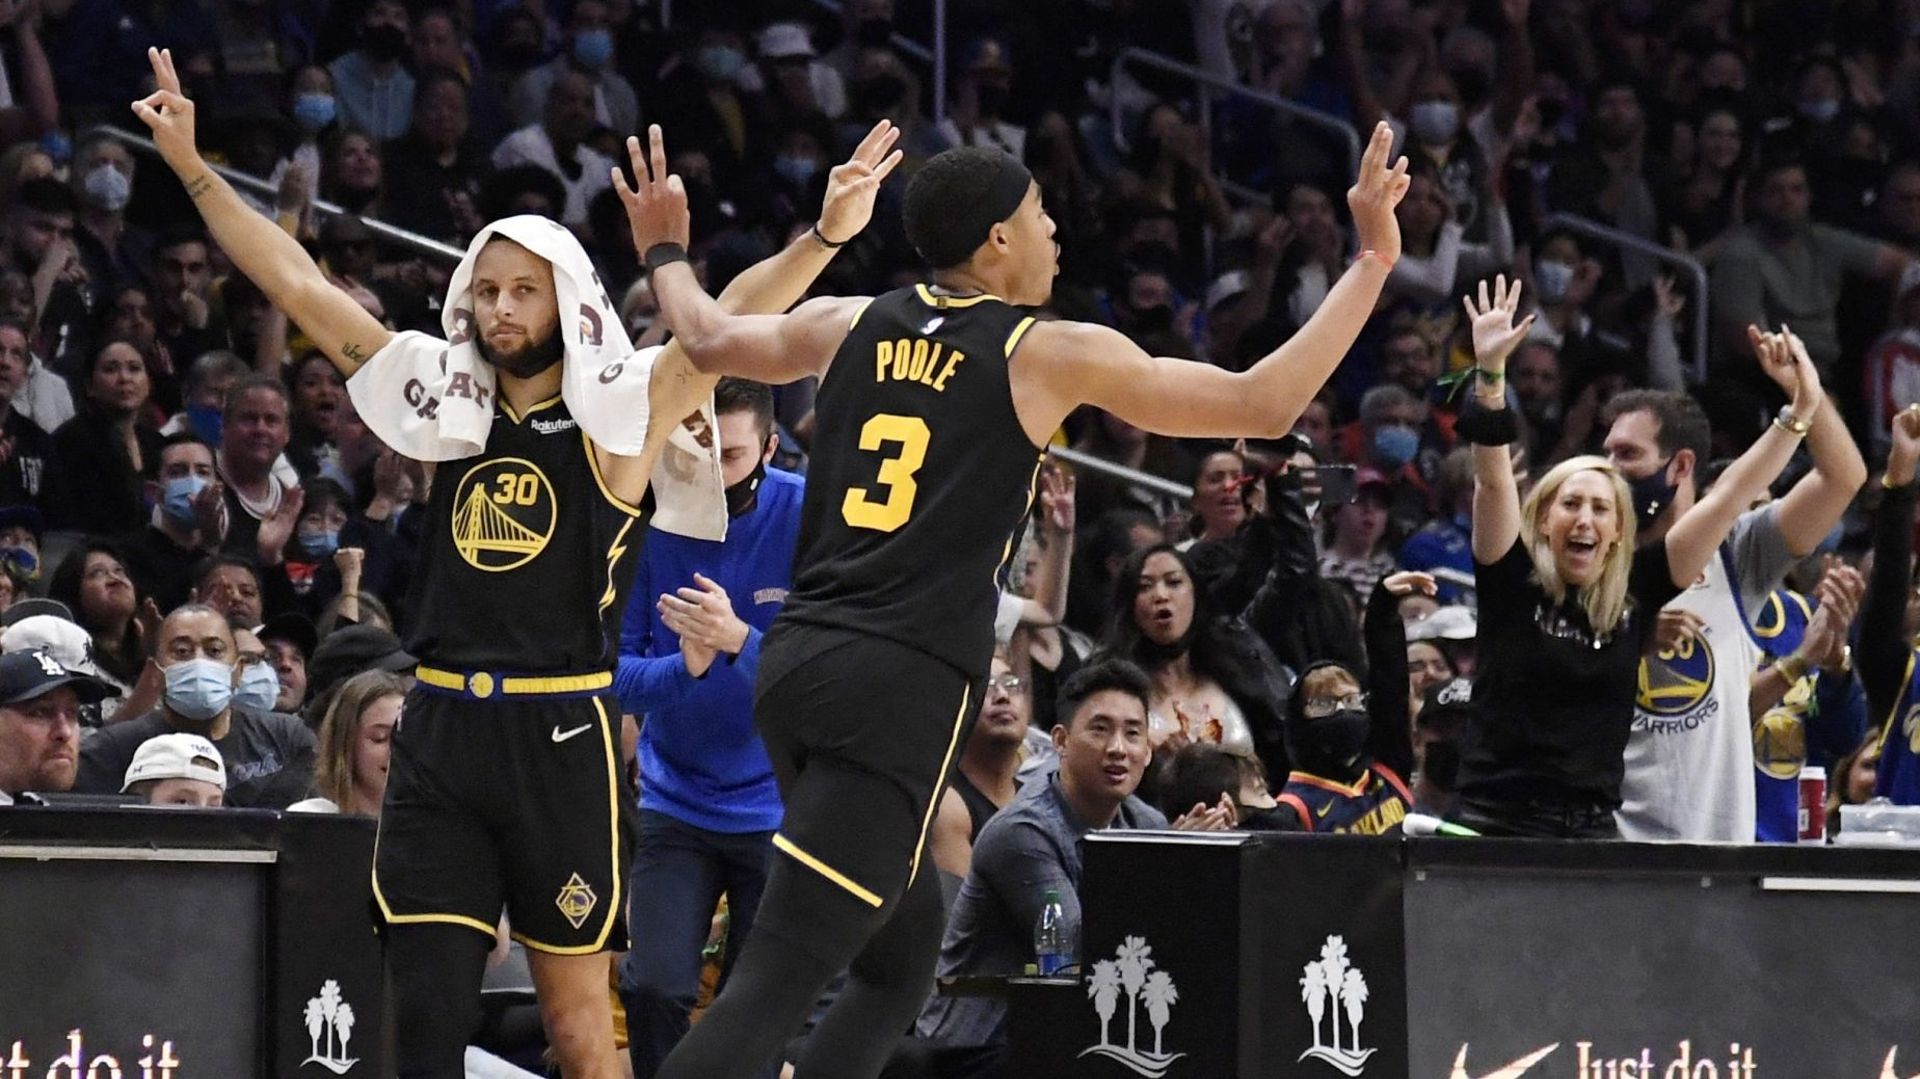 NBA : Golden State et les Lakers gagnent, Steph Curry impressionnant